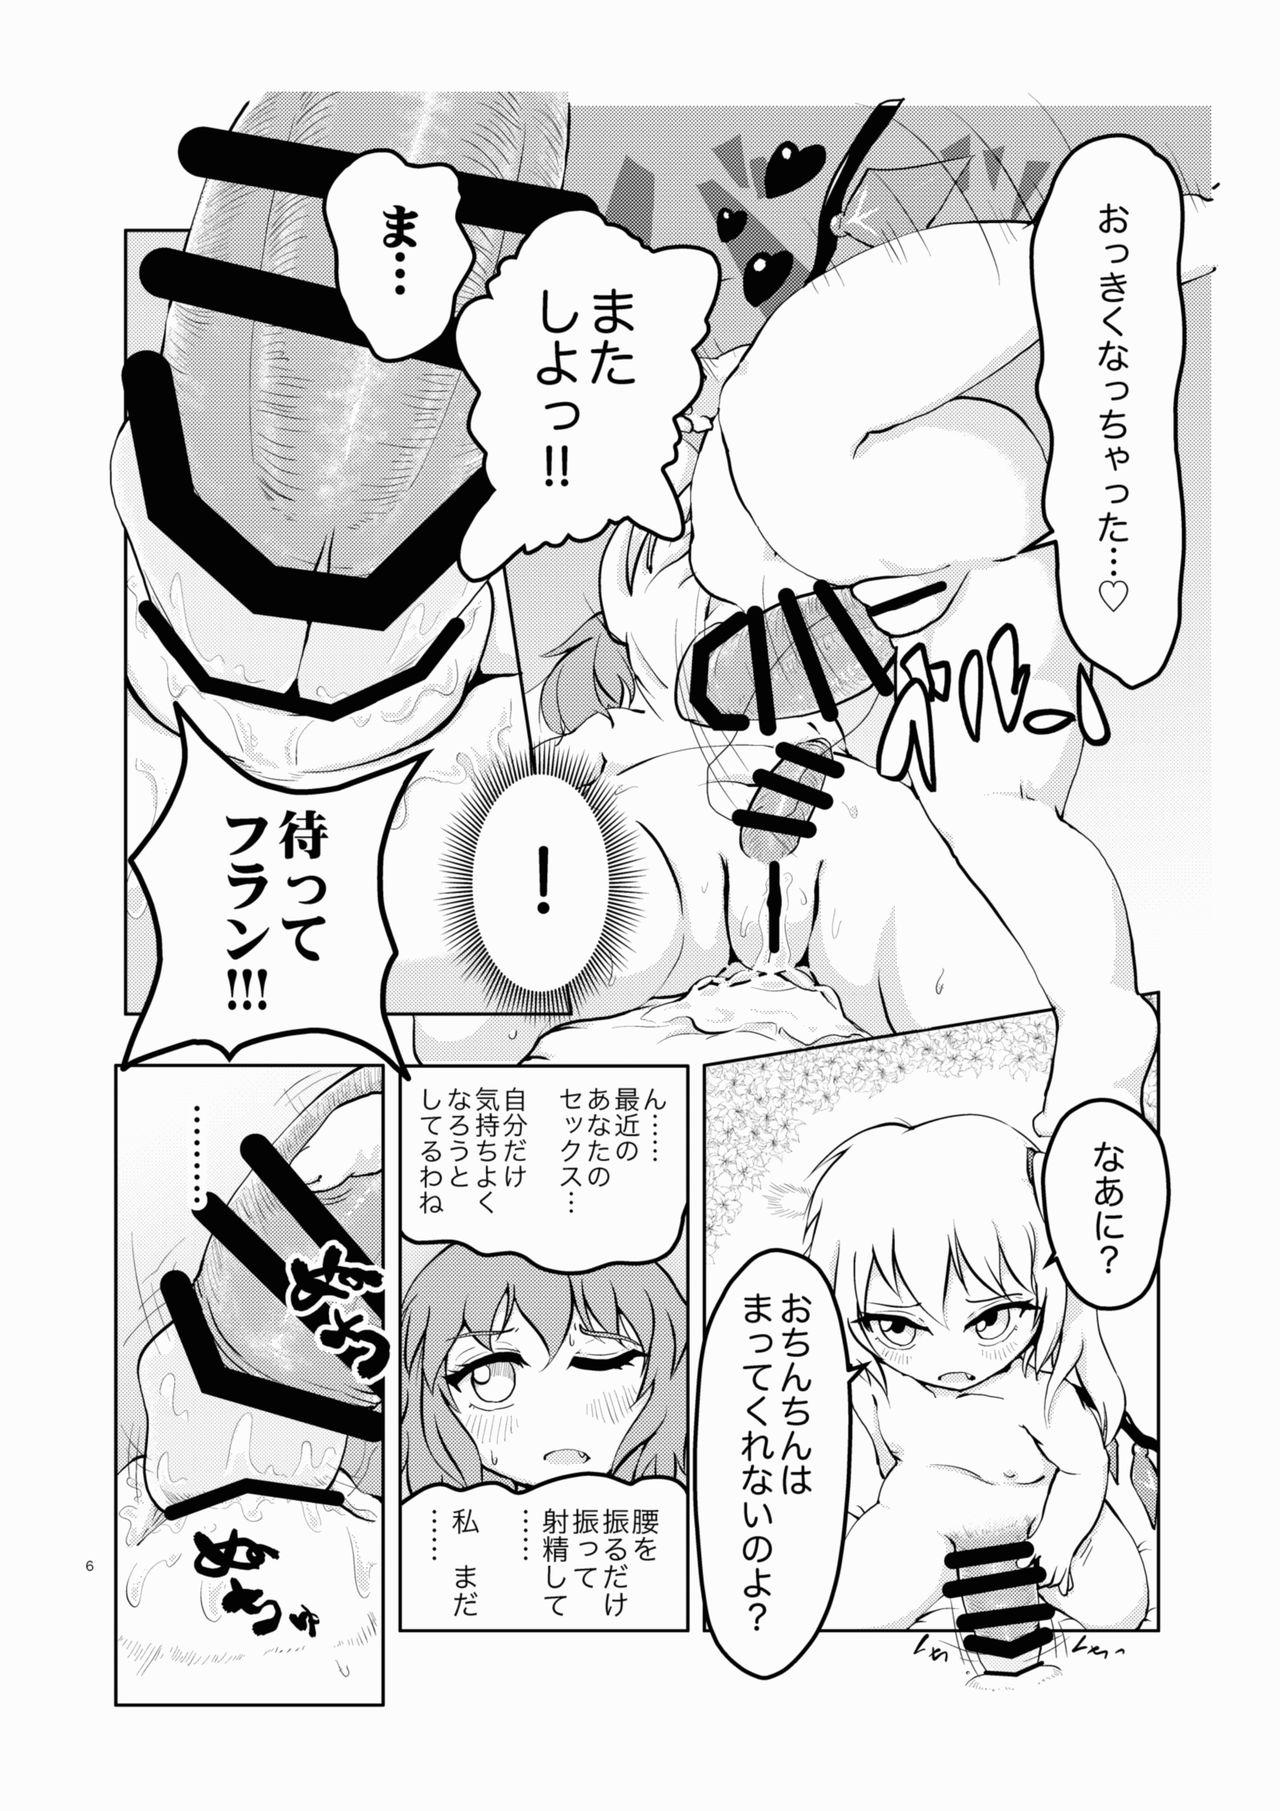 Cumshot Scarlet Conflict 1 - Touhou project Teenage Porn - Page 6